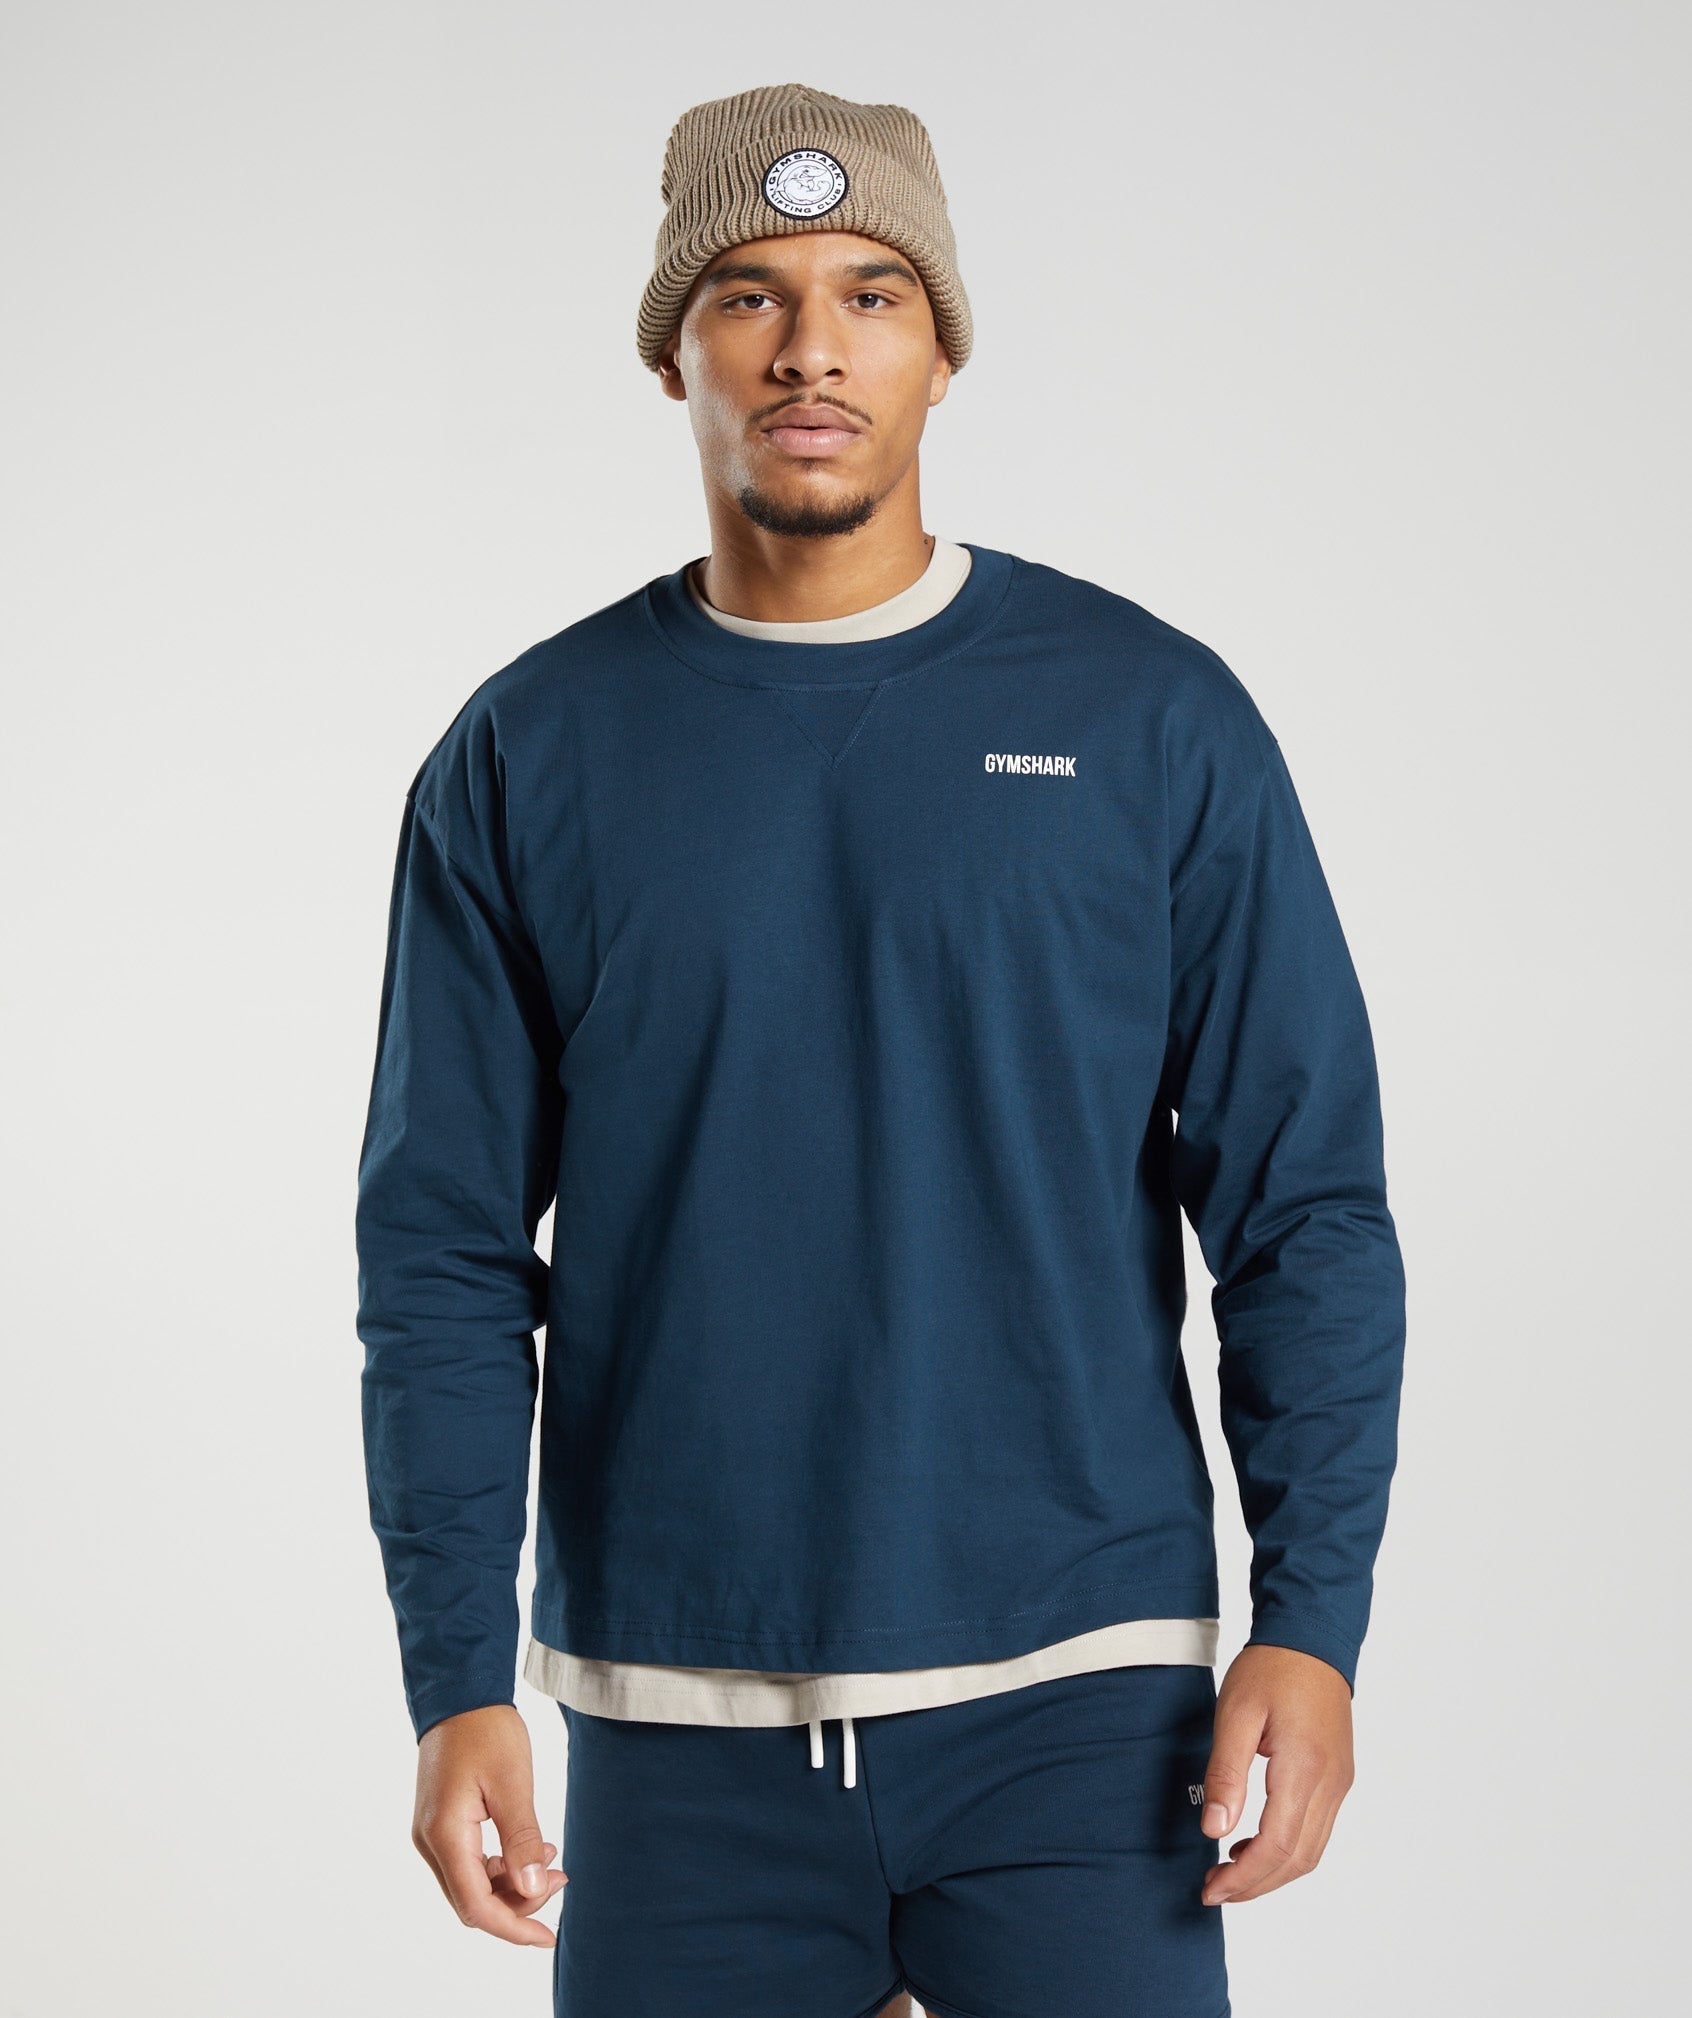 Rest Day Sweats Long Sleeve T-Shirt in Navy - view 2